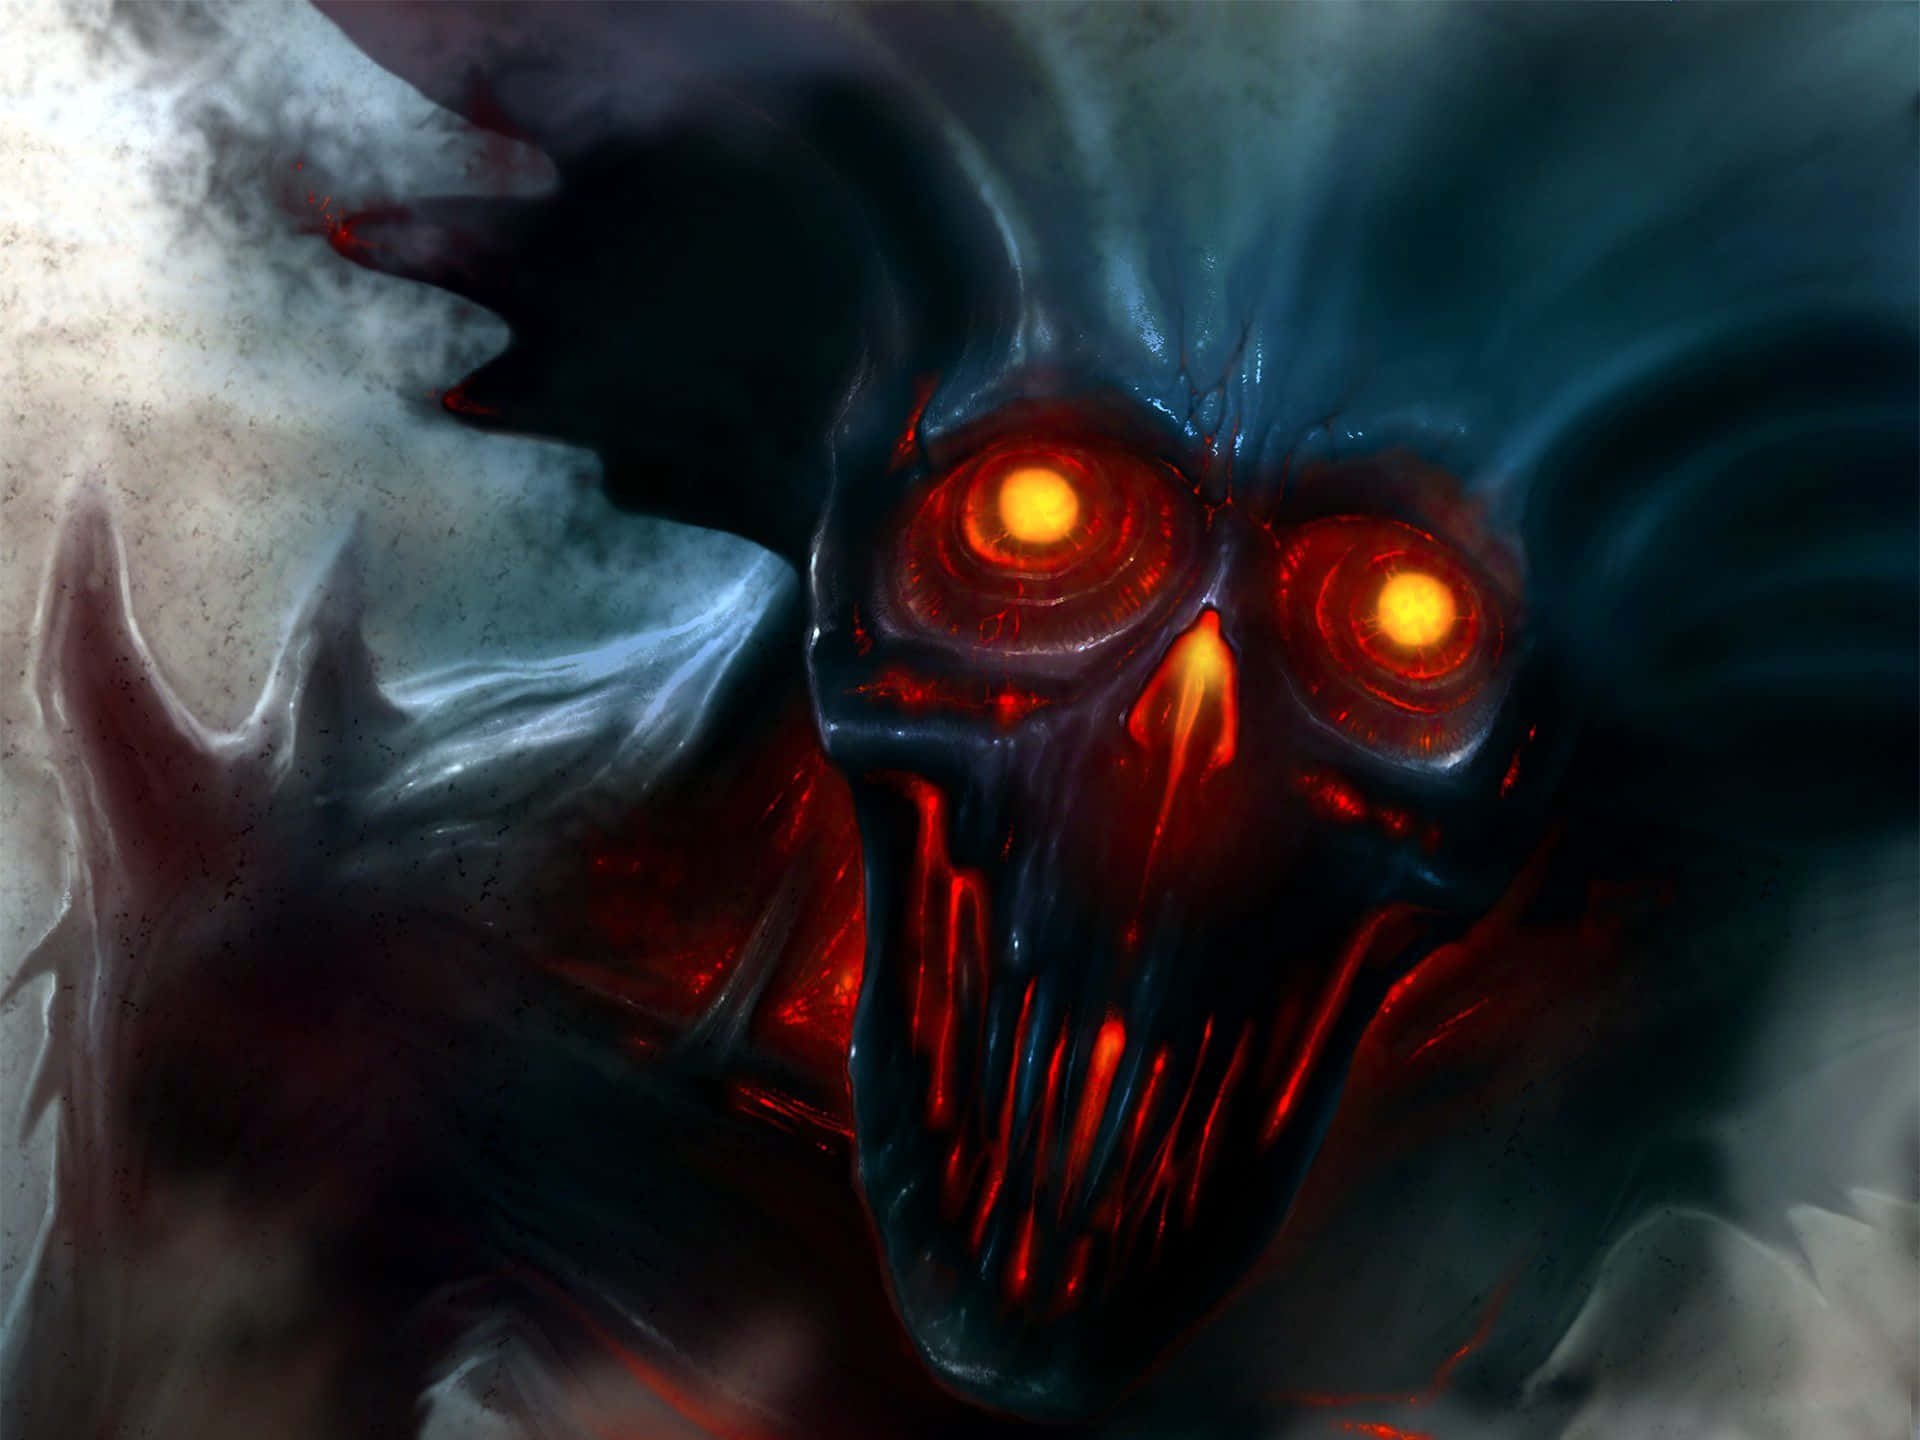 A mysterious dark demon set in a reflective abyss Wallpaper